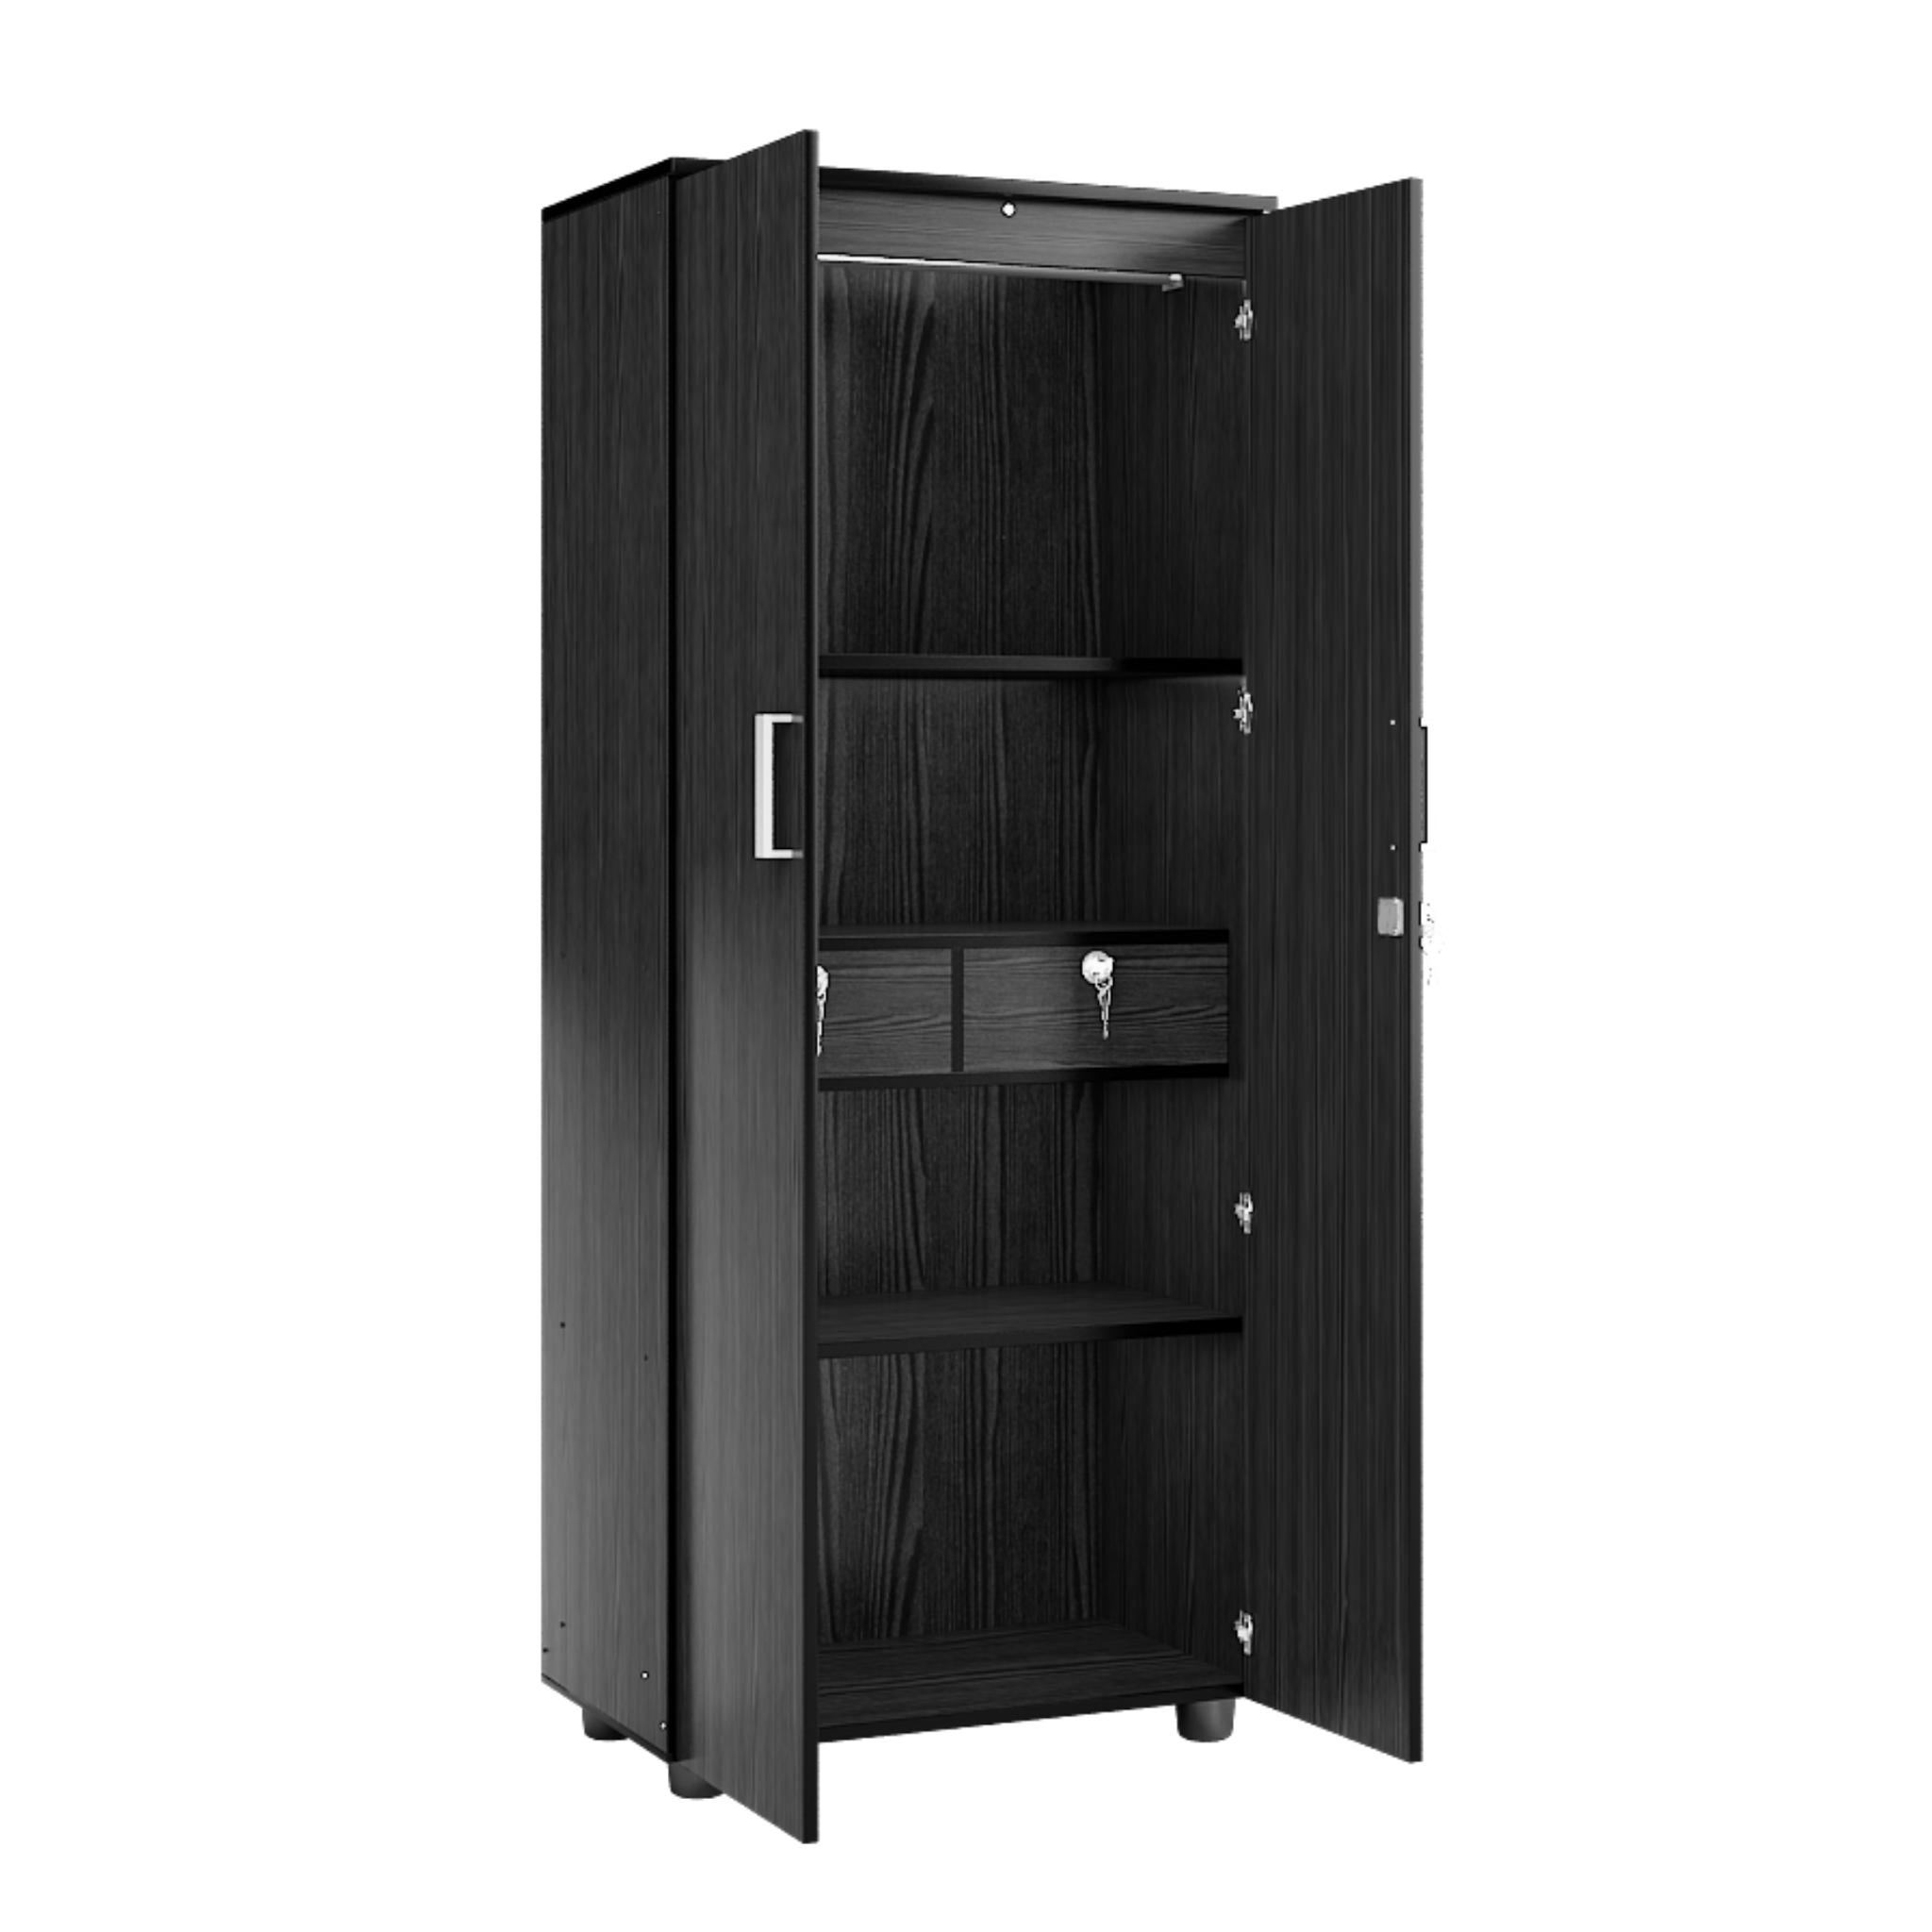 Super and Luxury Two Door Wardrobe with Dual Drawer